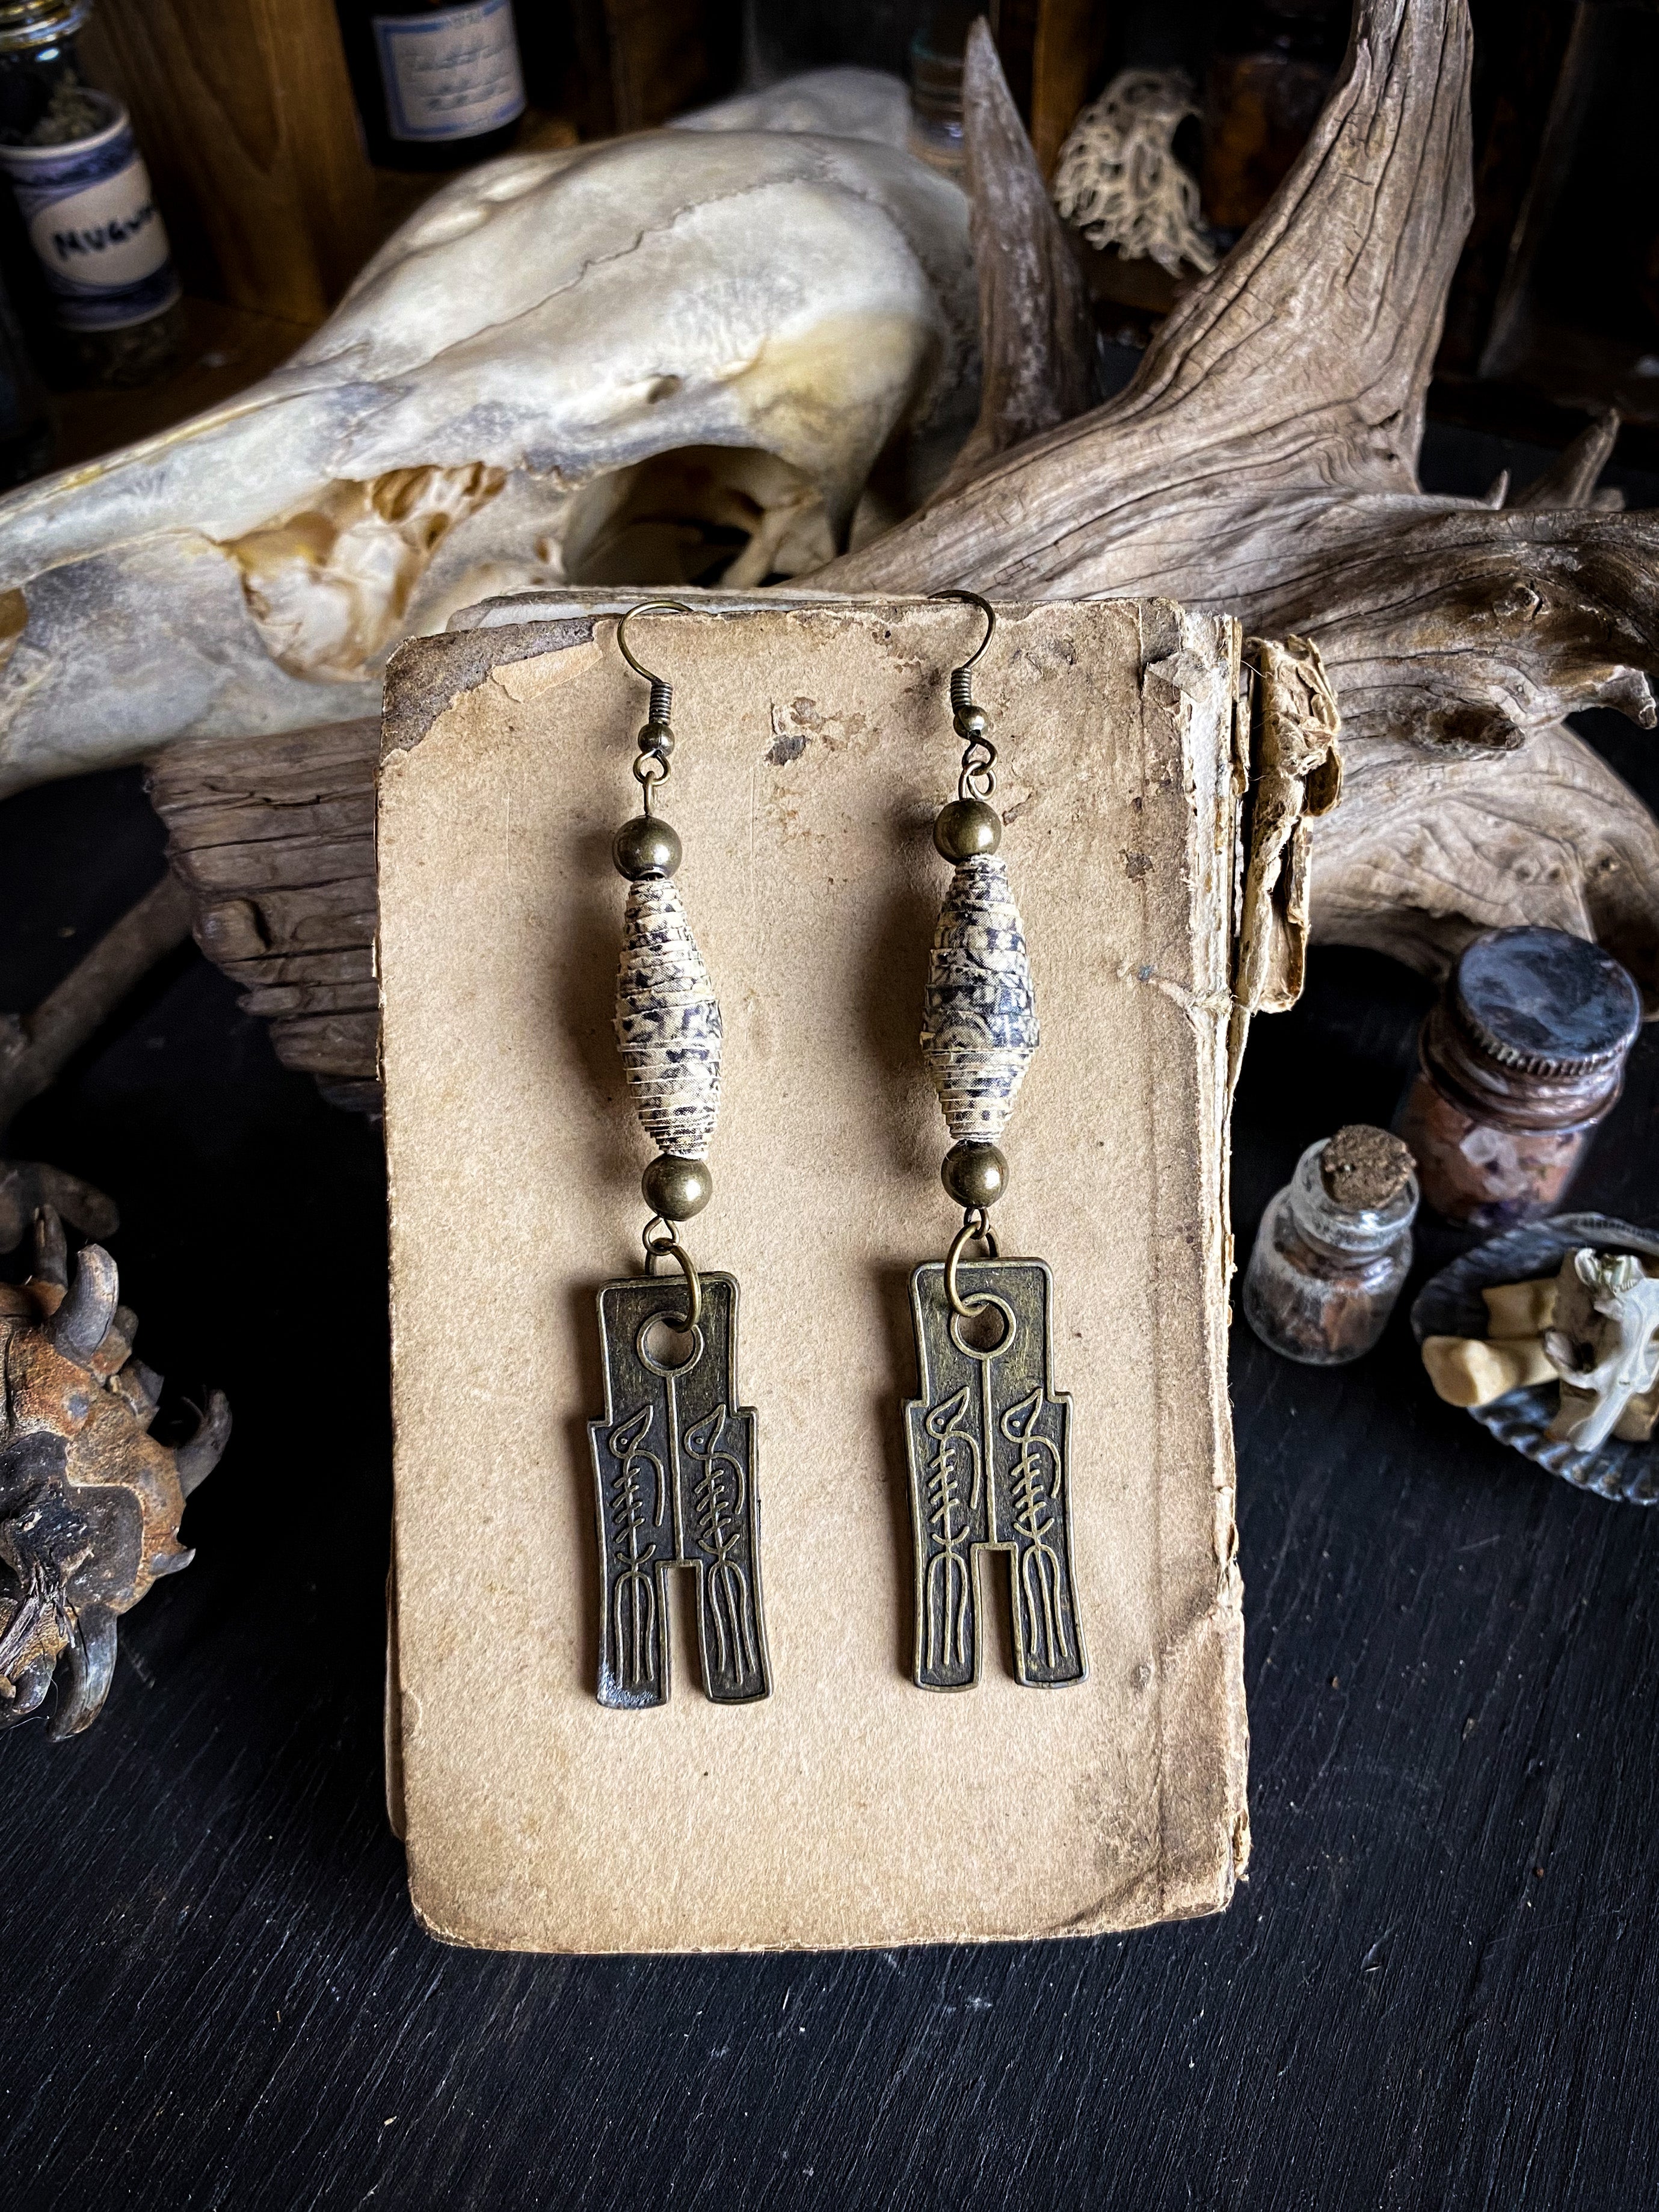 Primitive Arts - Hand Crafted Earrings